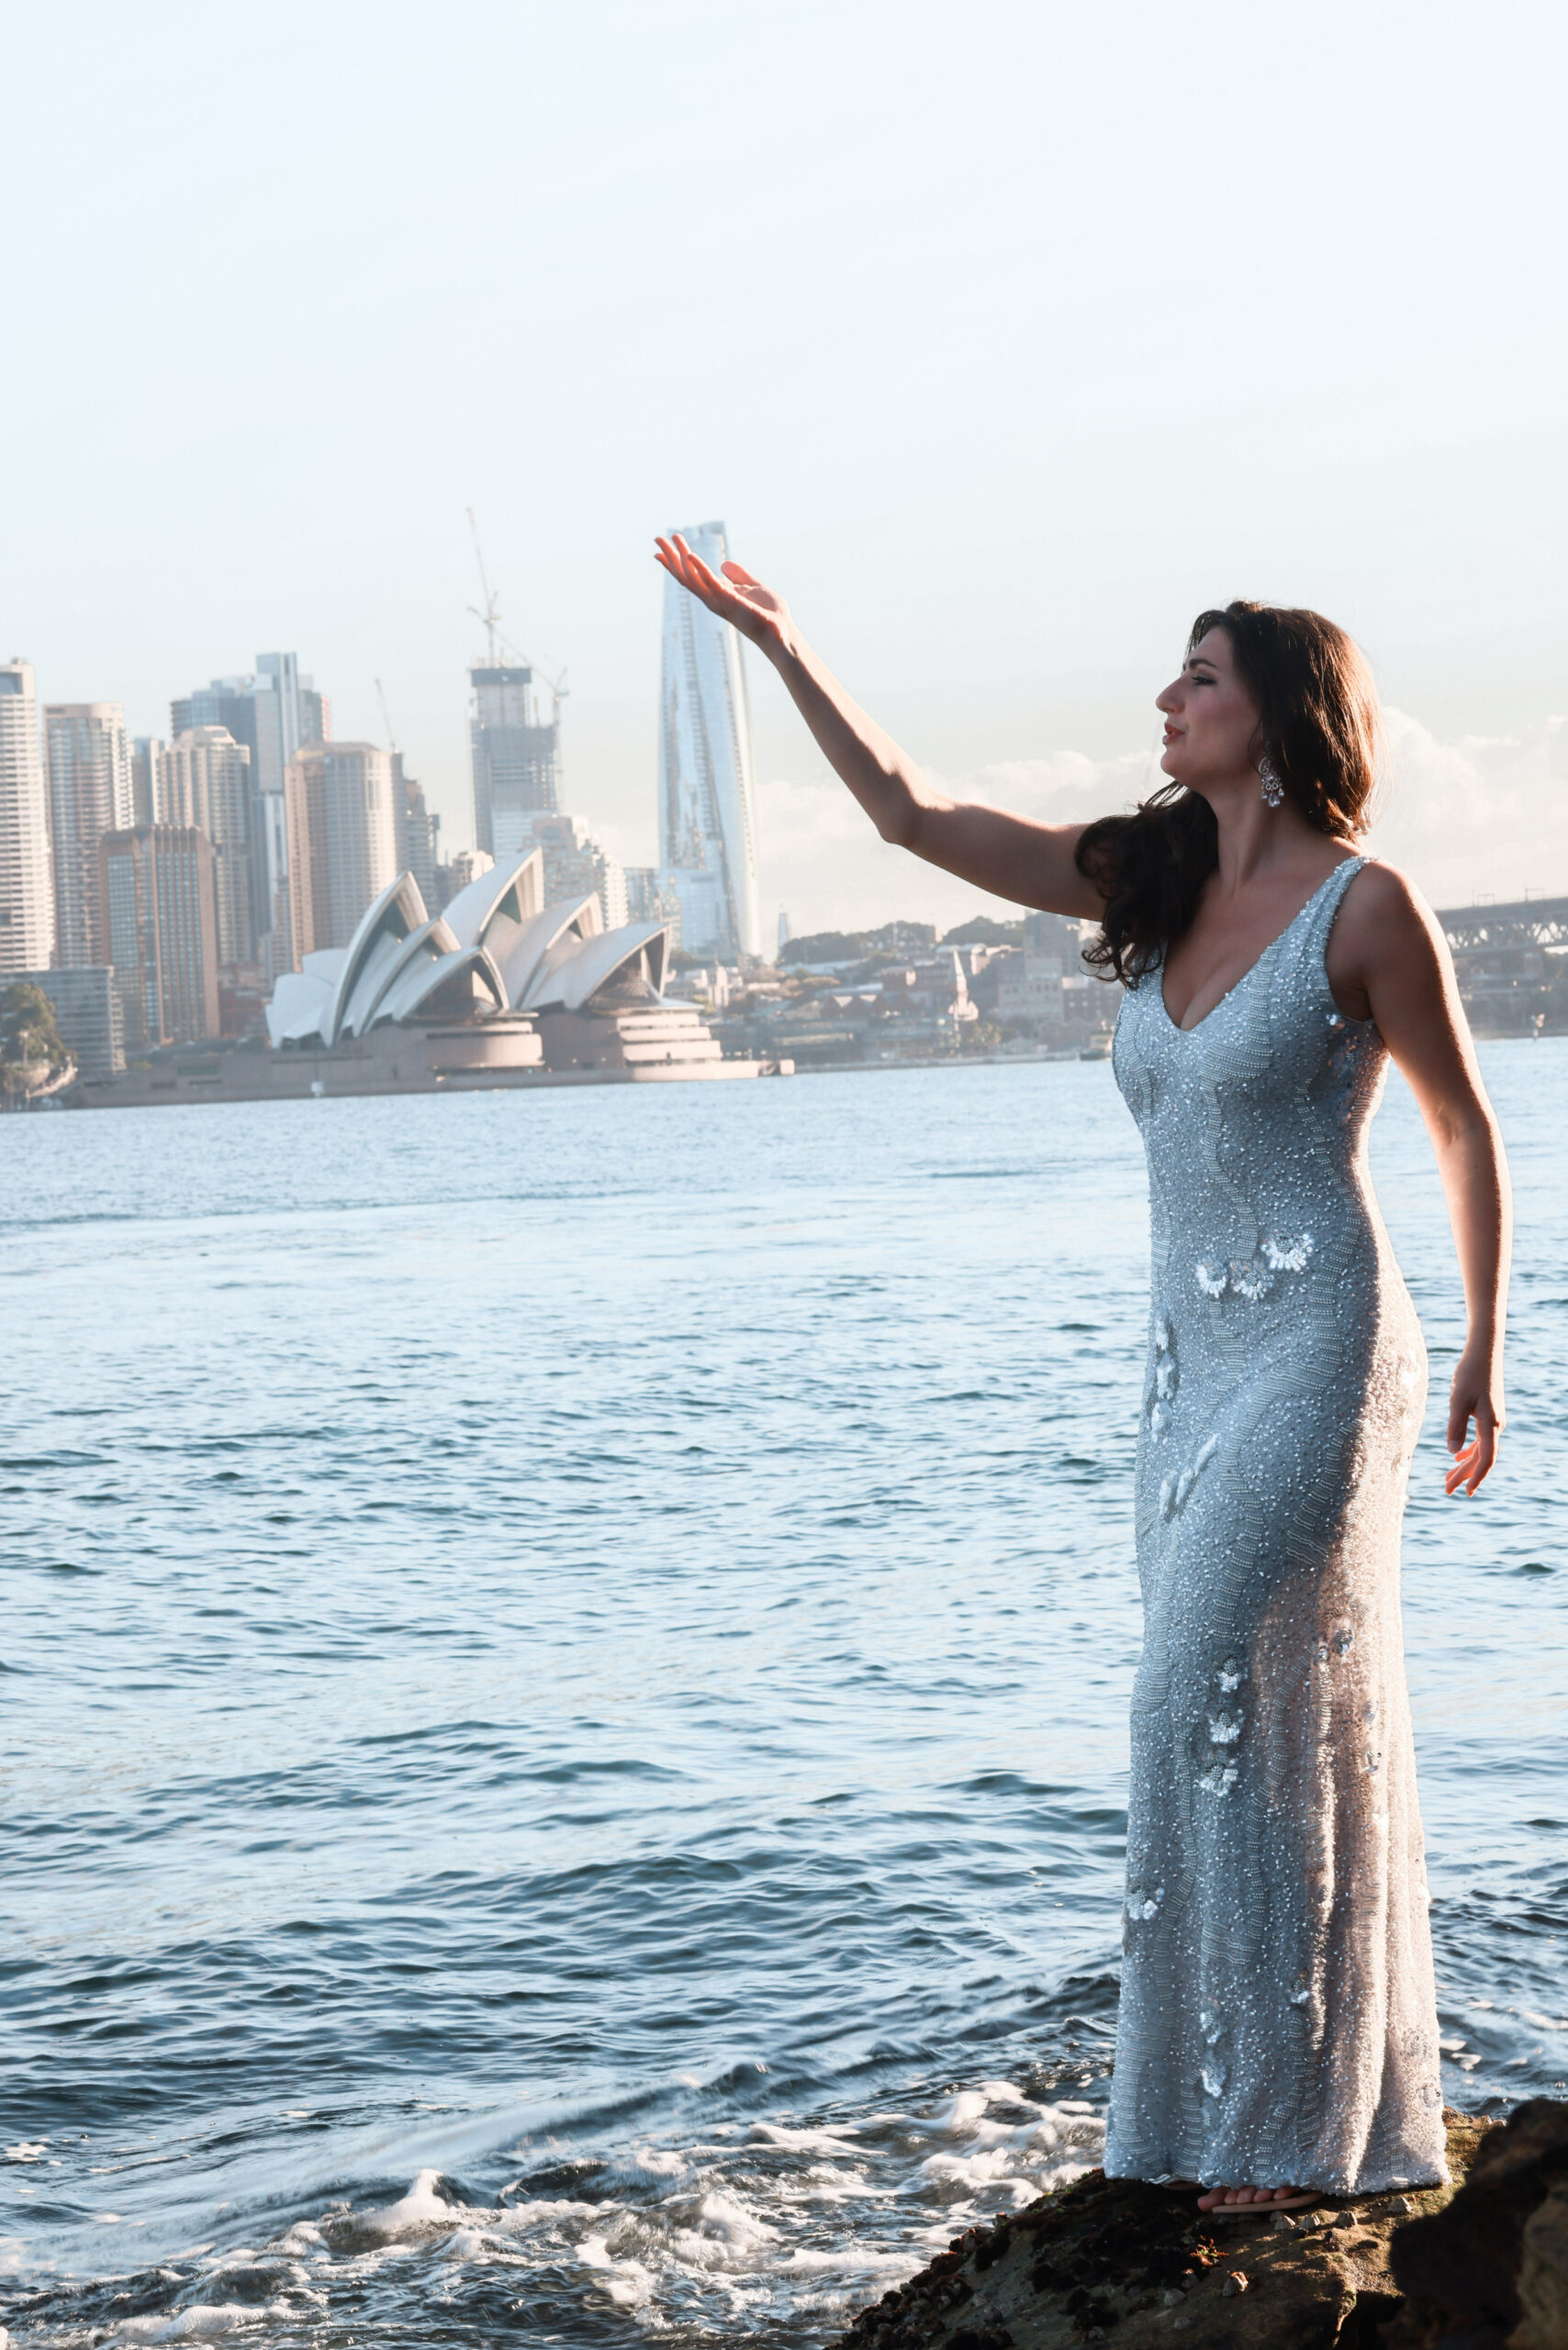 Opera for young regional Australia - from the Outback to the world featured image